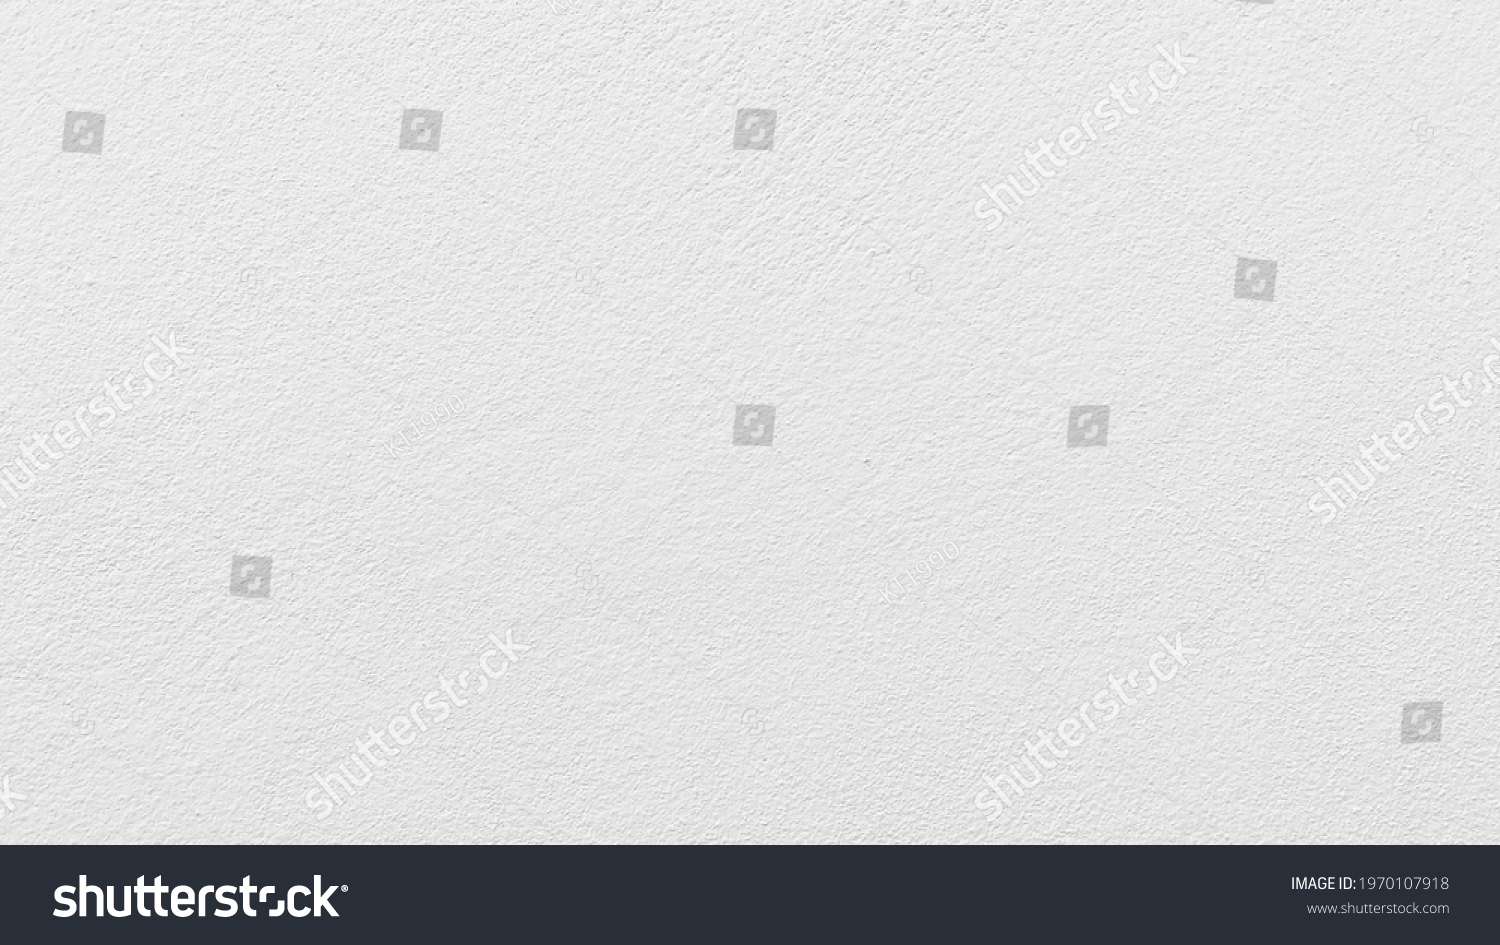 White paper texture background, white paper, paper background #1970107918